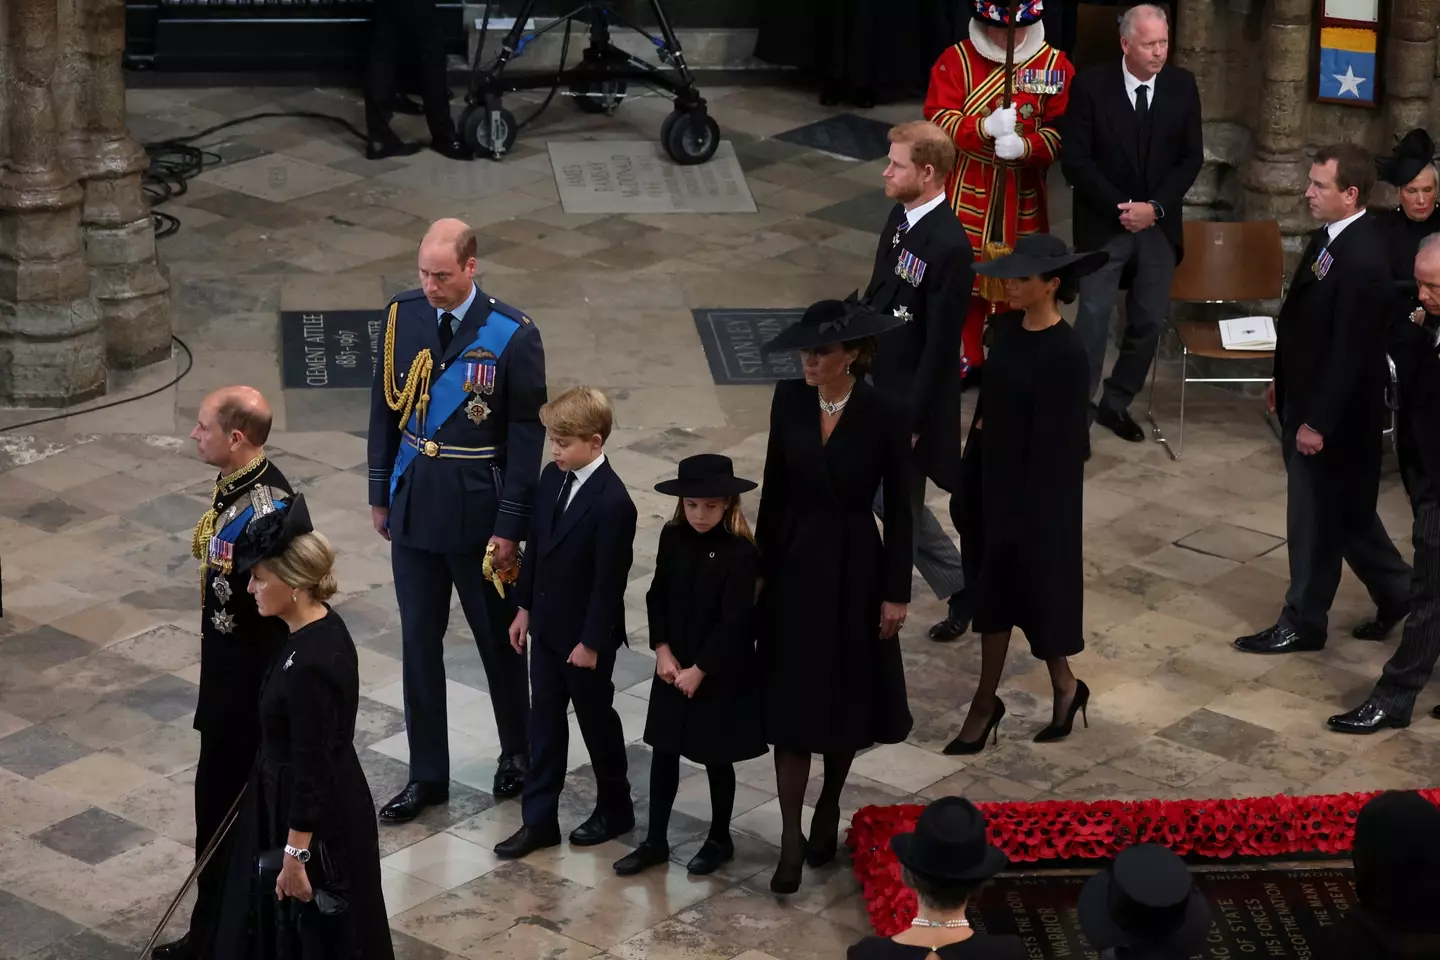 Prince Louis was absent from the Queen's funeral as the Prince and Princess of Wales, Prince George and Princess Charlotte attended.